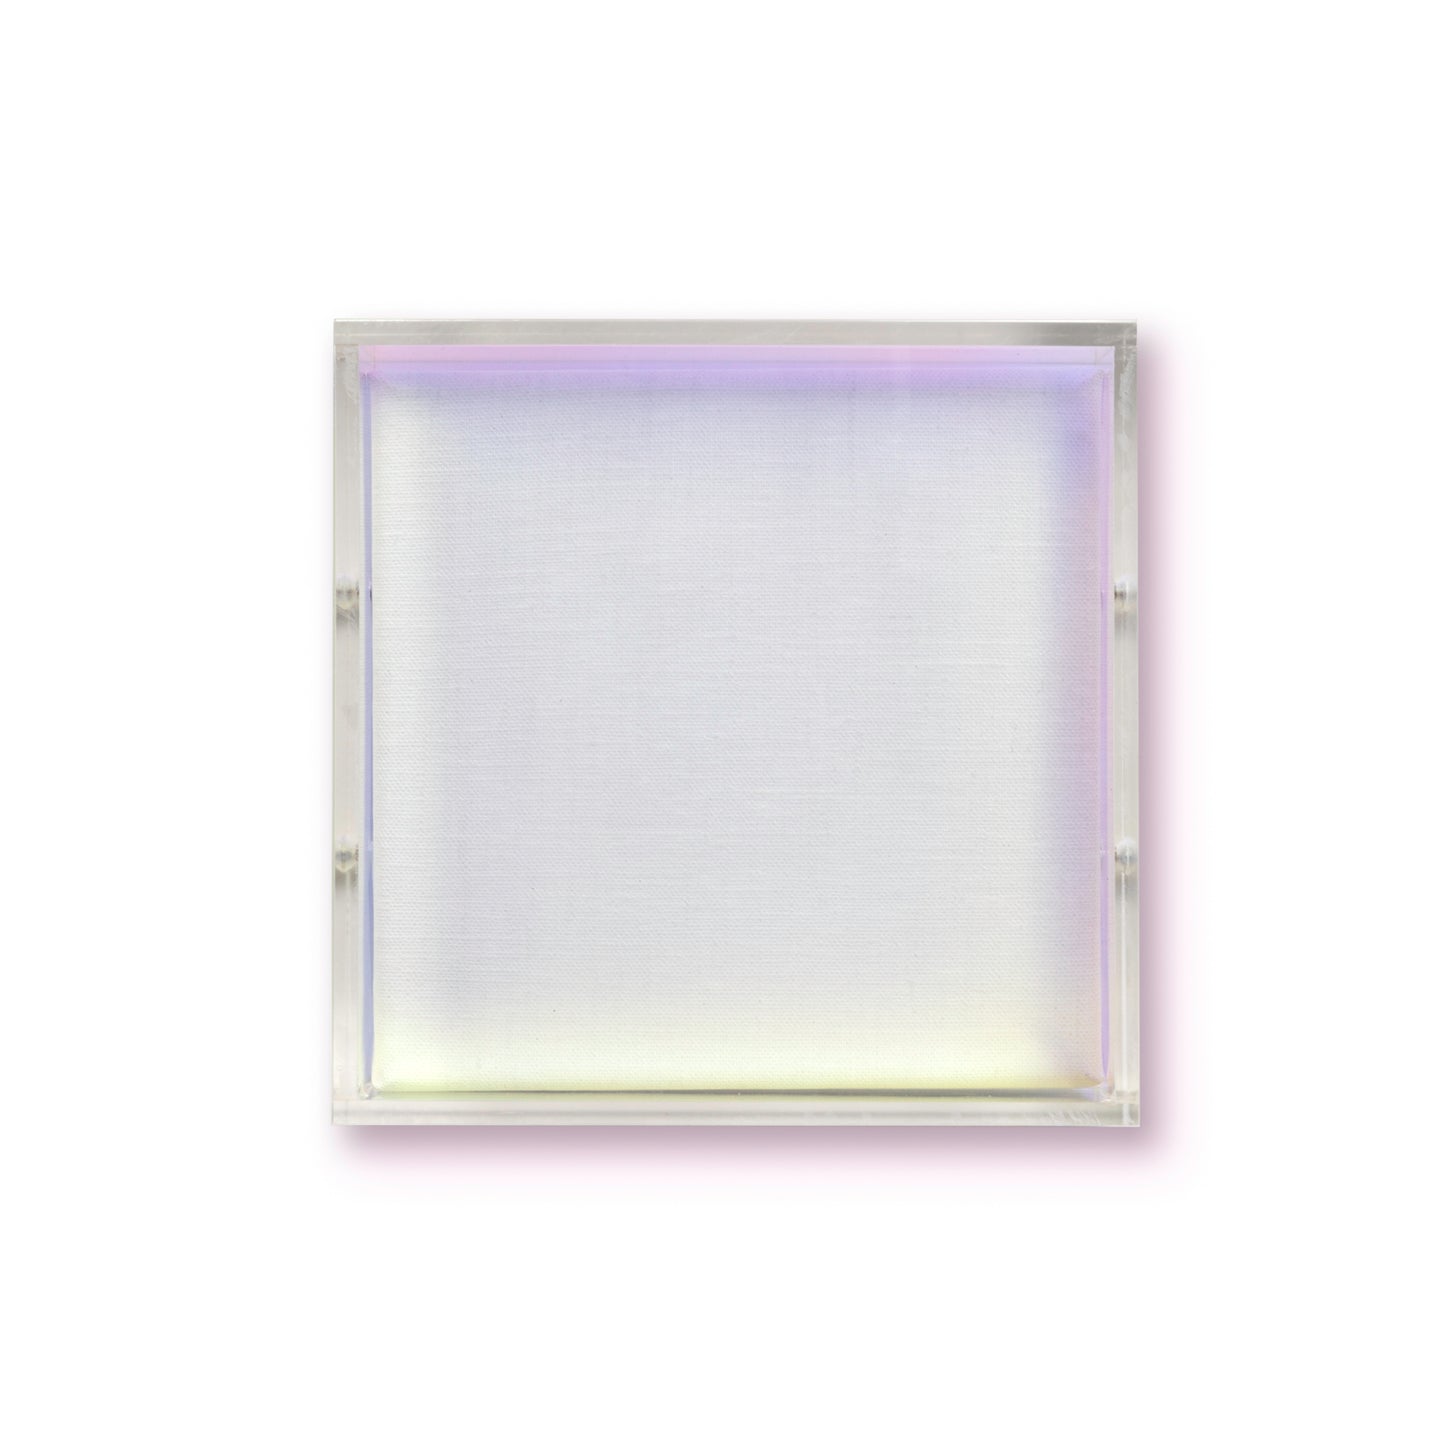 Case Pack of Rainbow Acrylic Shadowbox with White Canvas